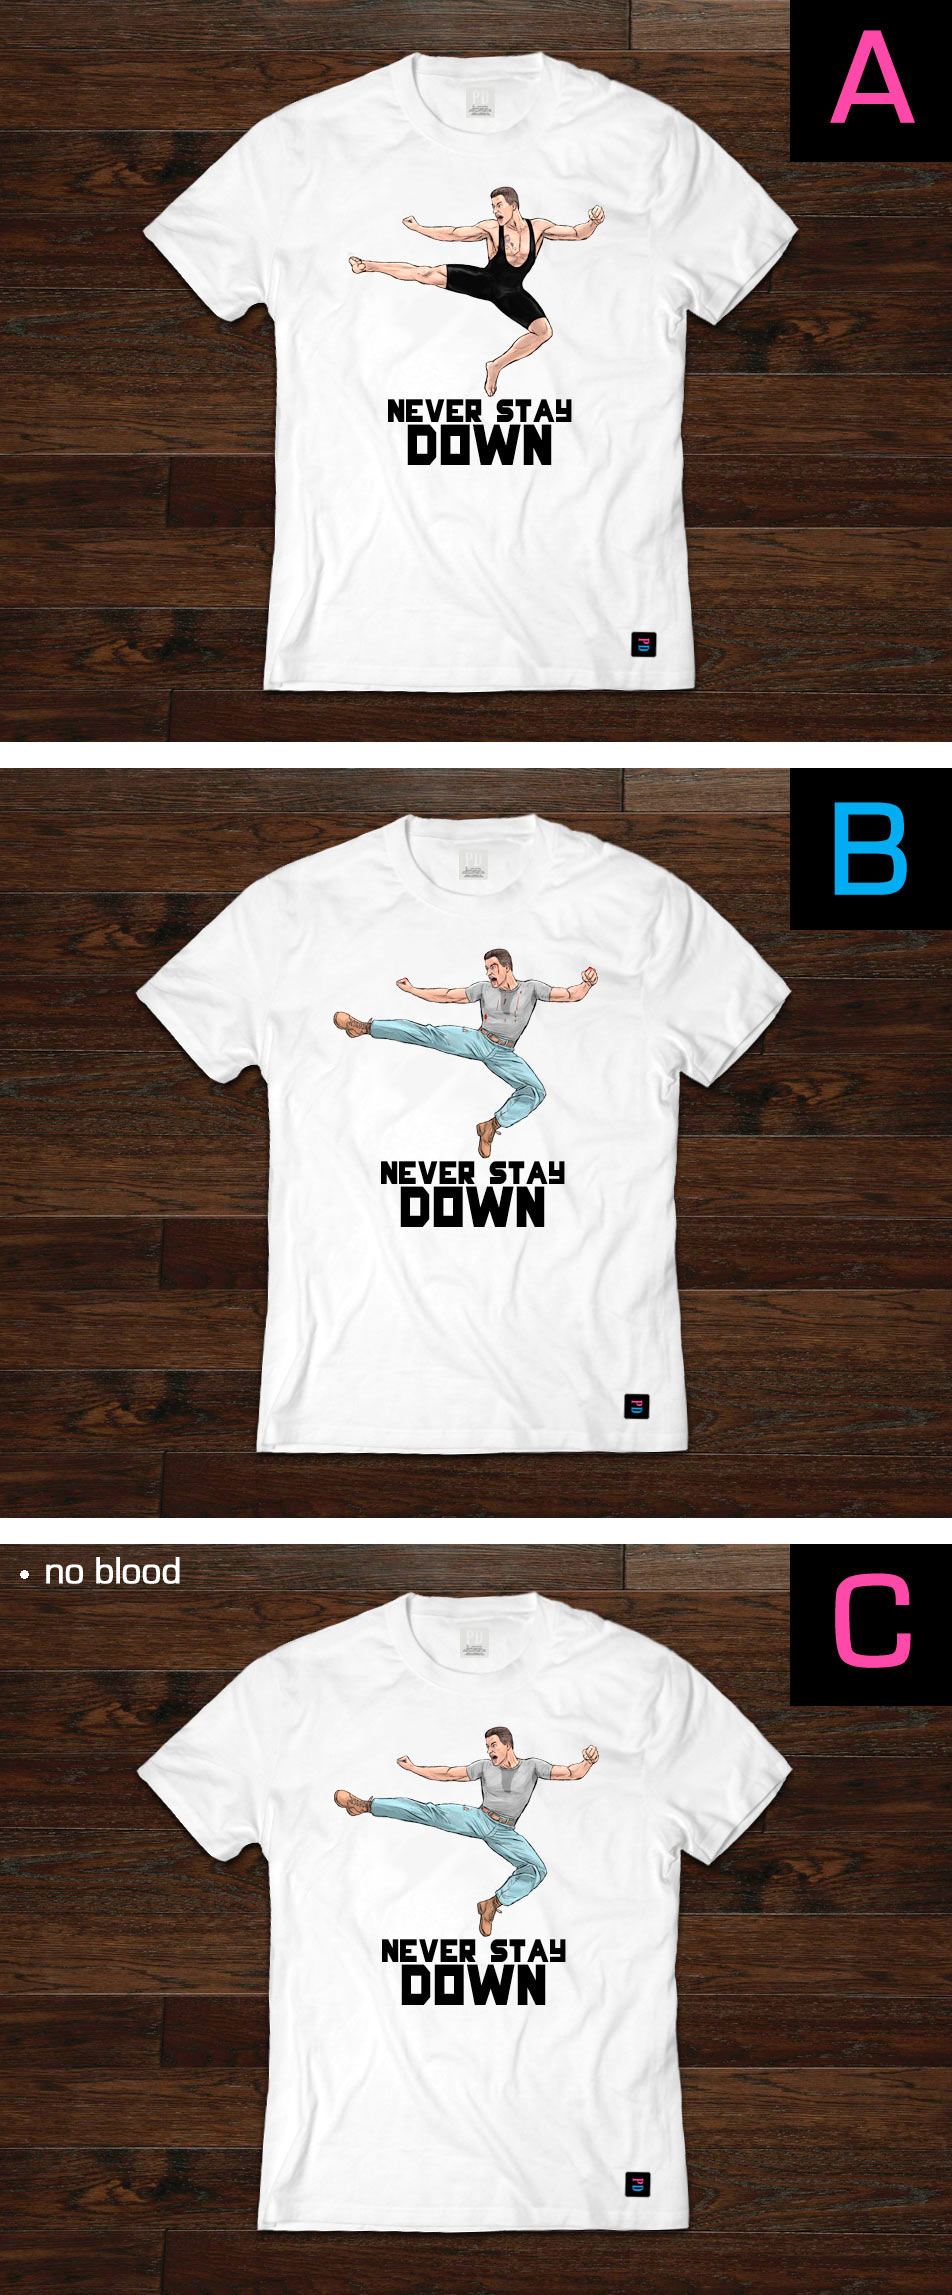 Never Stay Down PD T-Shirt designs by Marten Go aka MGO